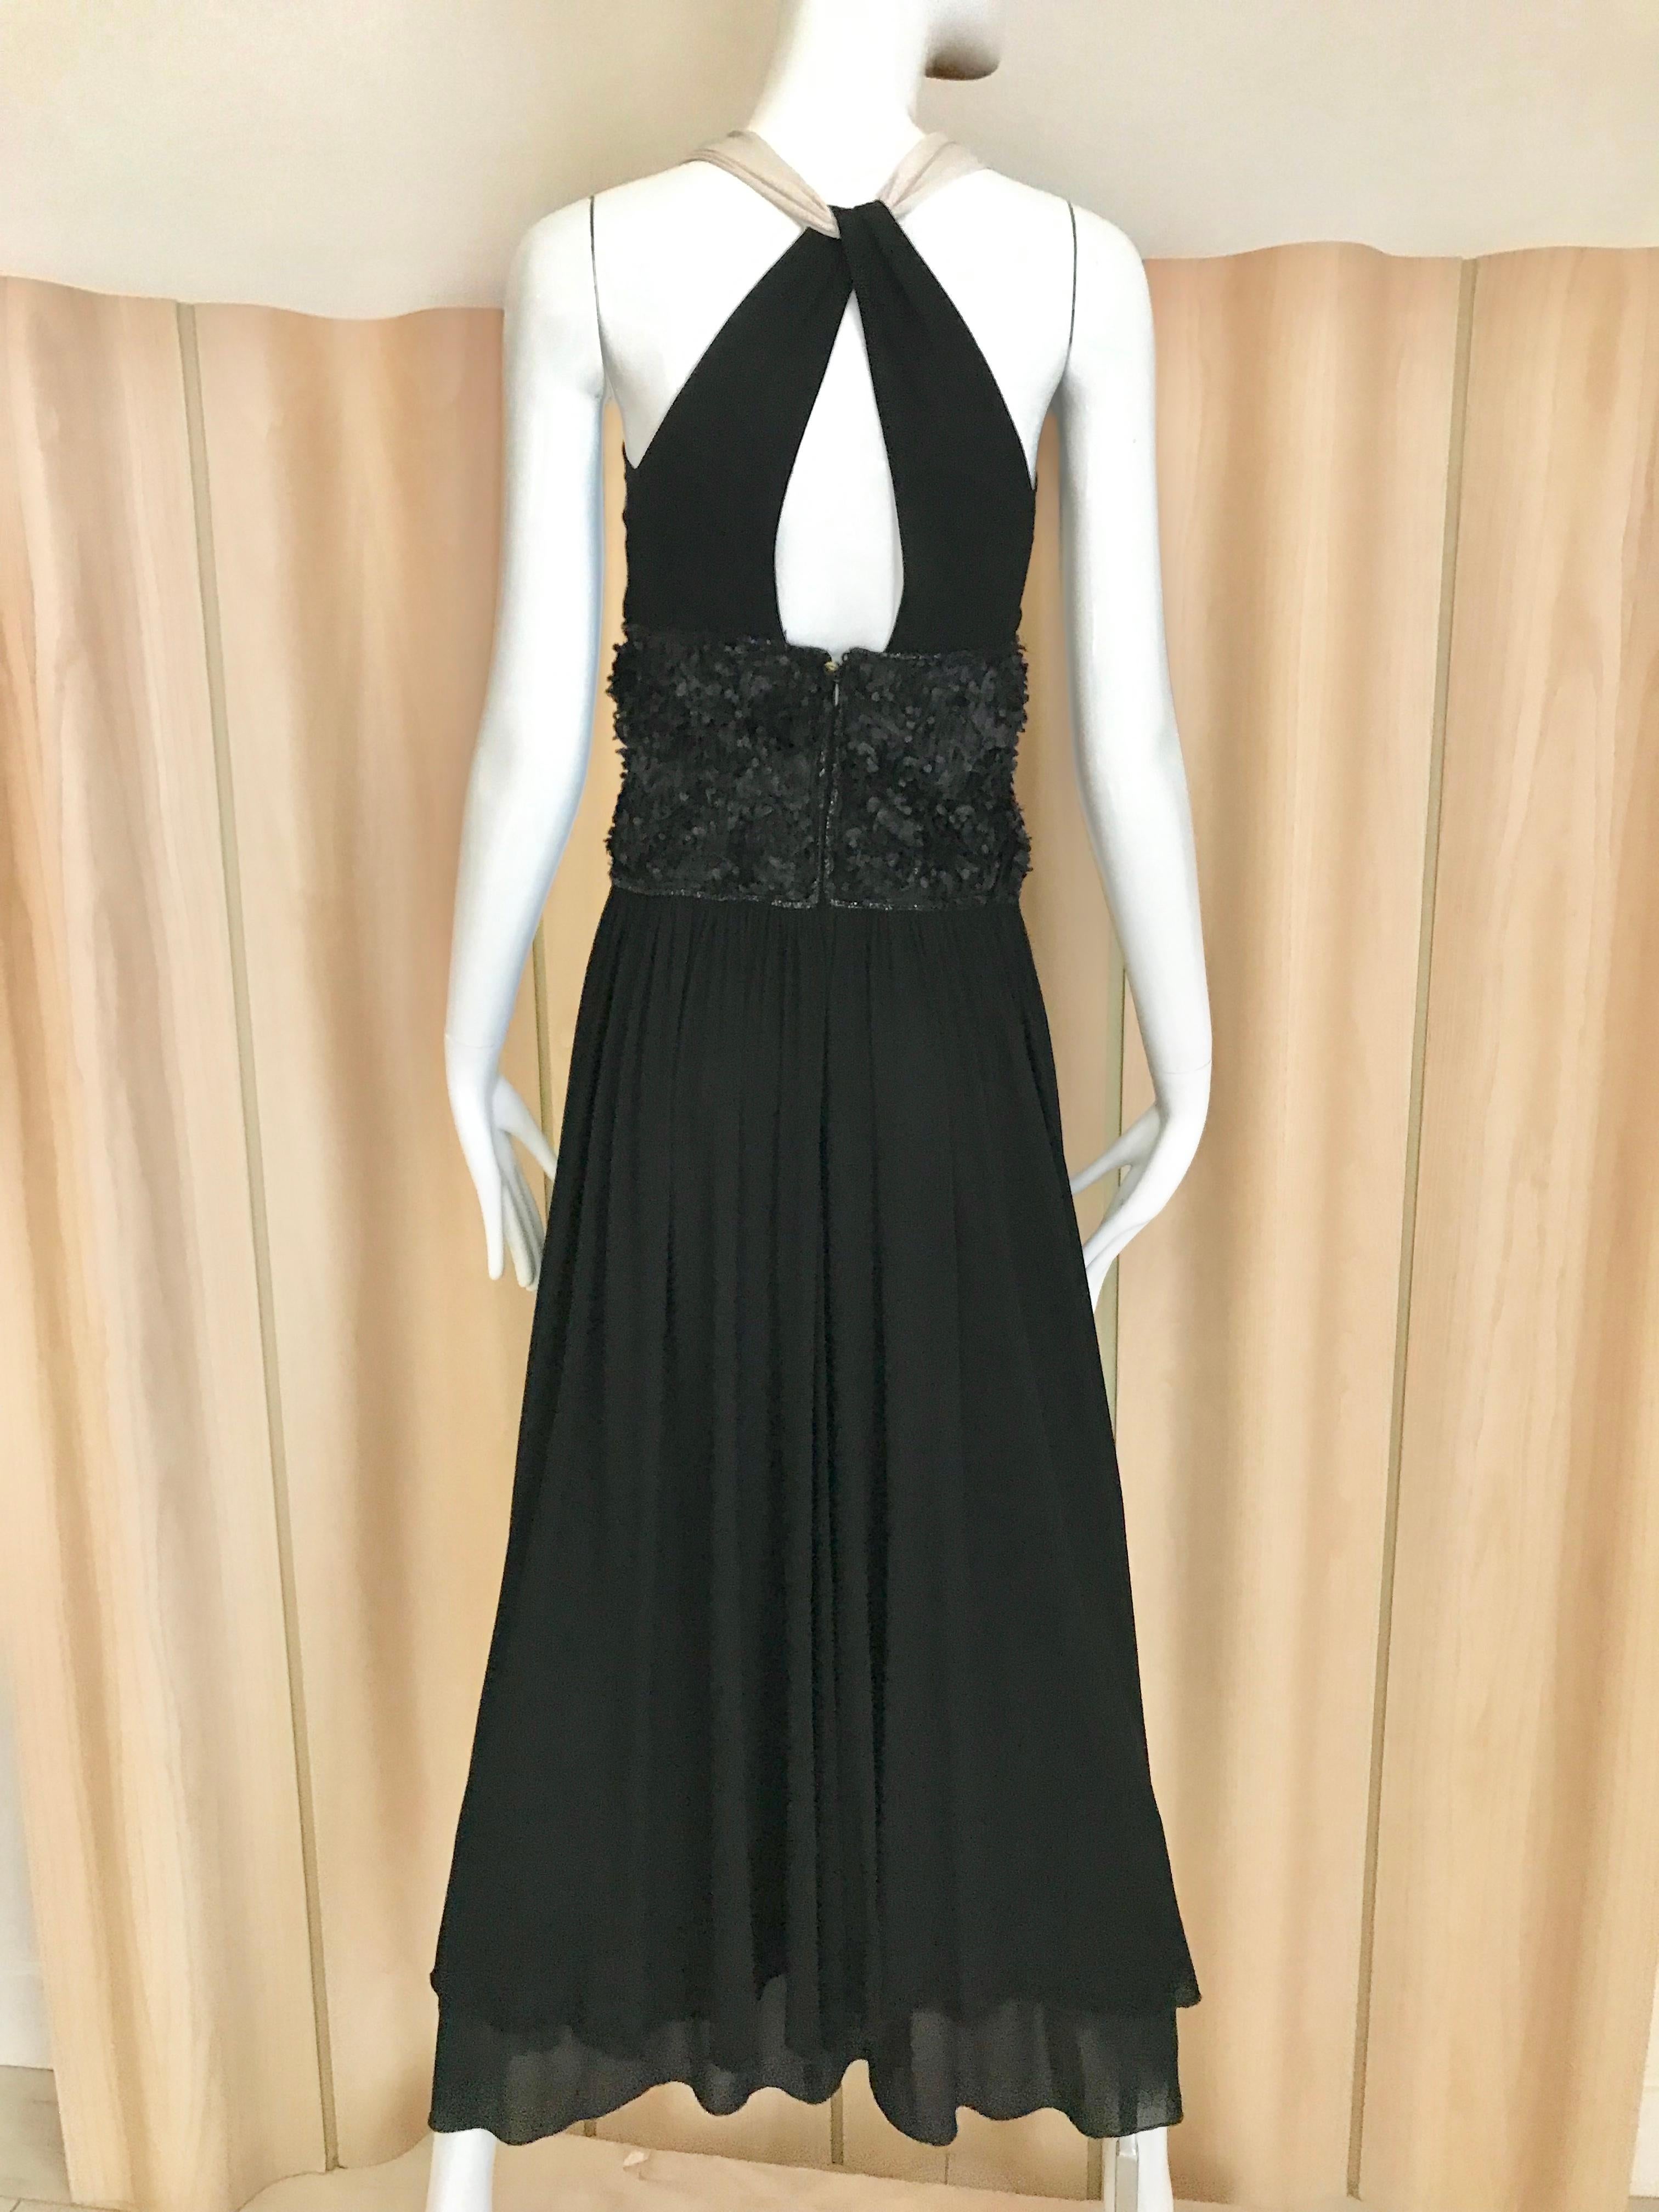 Vintage Chanel Black and White Halter Maxi Dress In Good Condition For Sale In Beverly Hills, CA